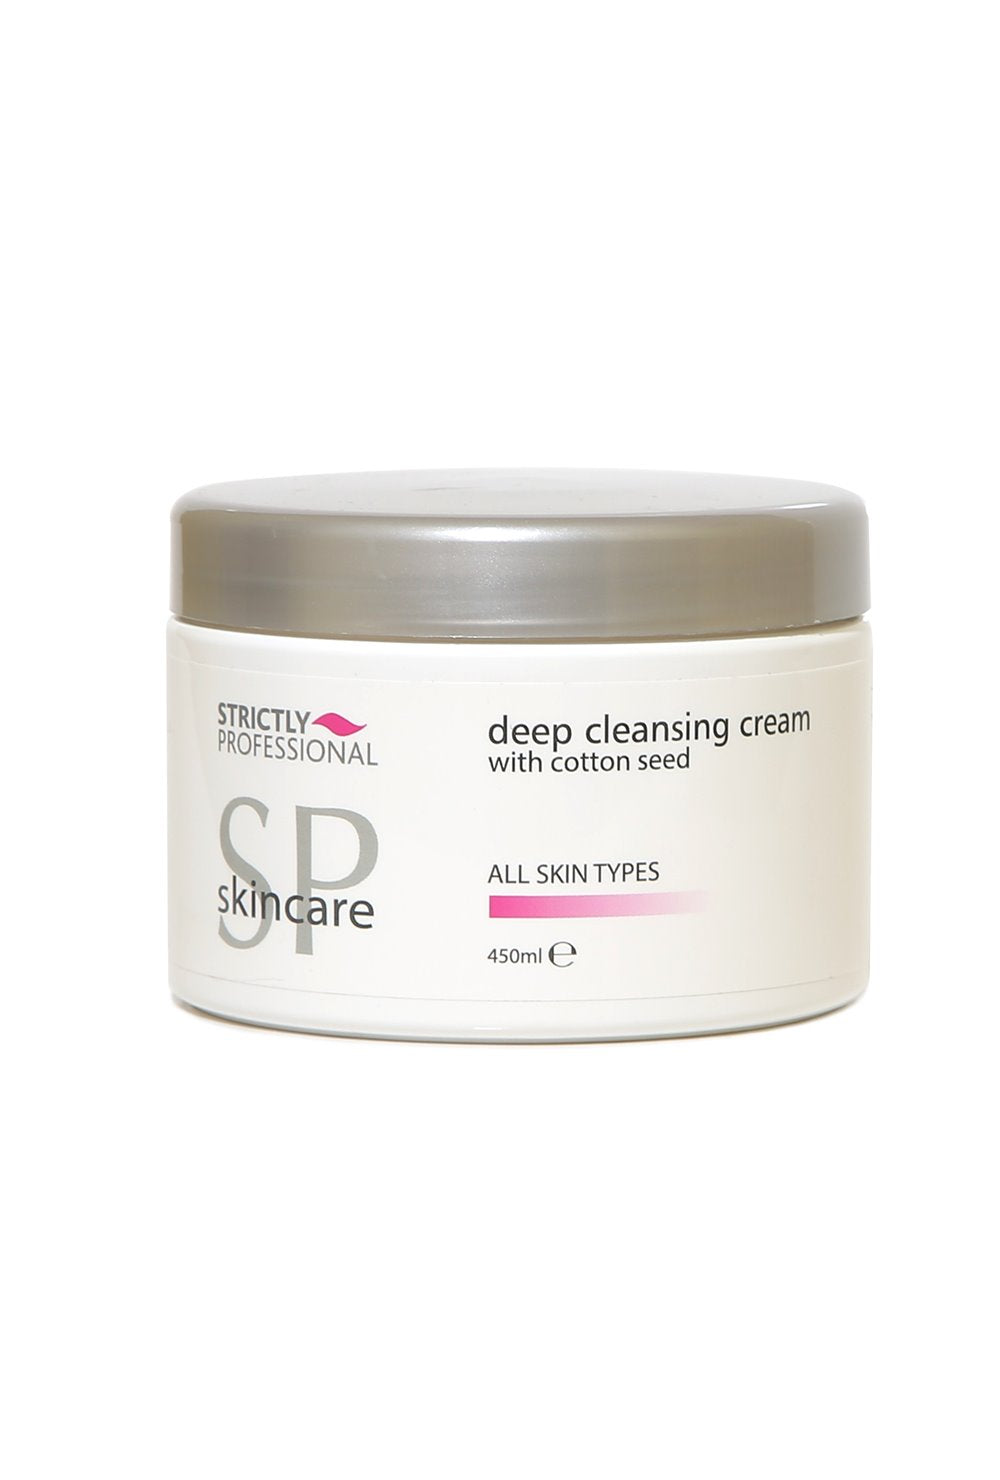 Strictly Professional Deep Cleansing Cream